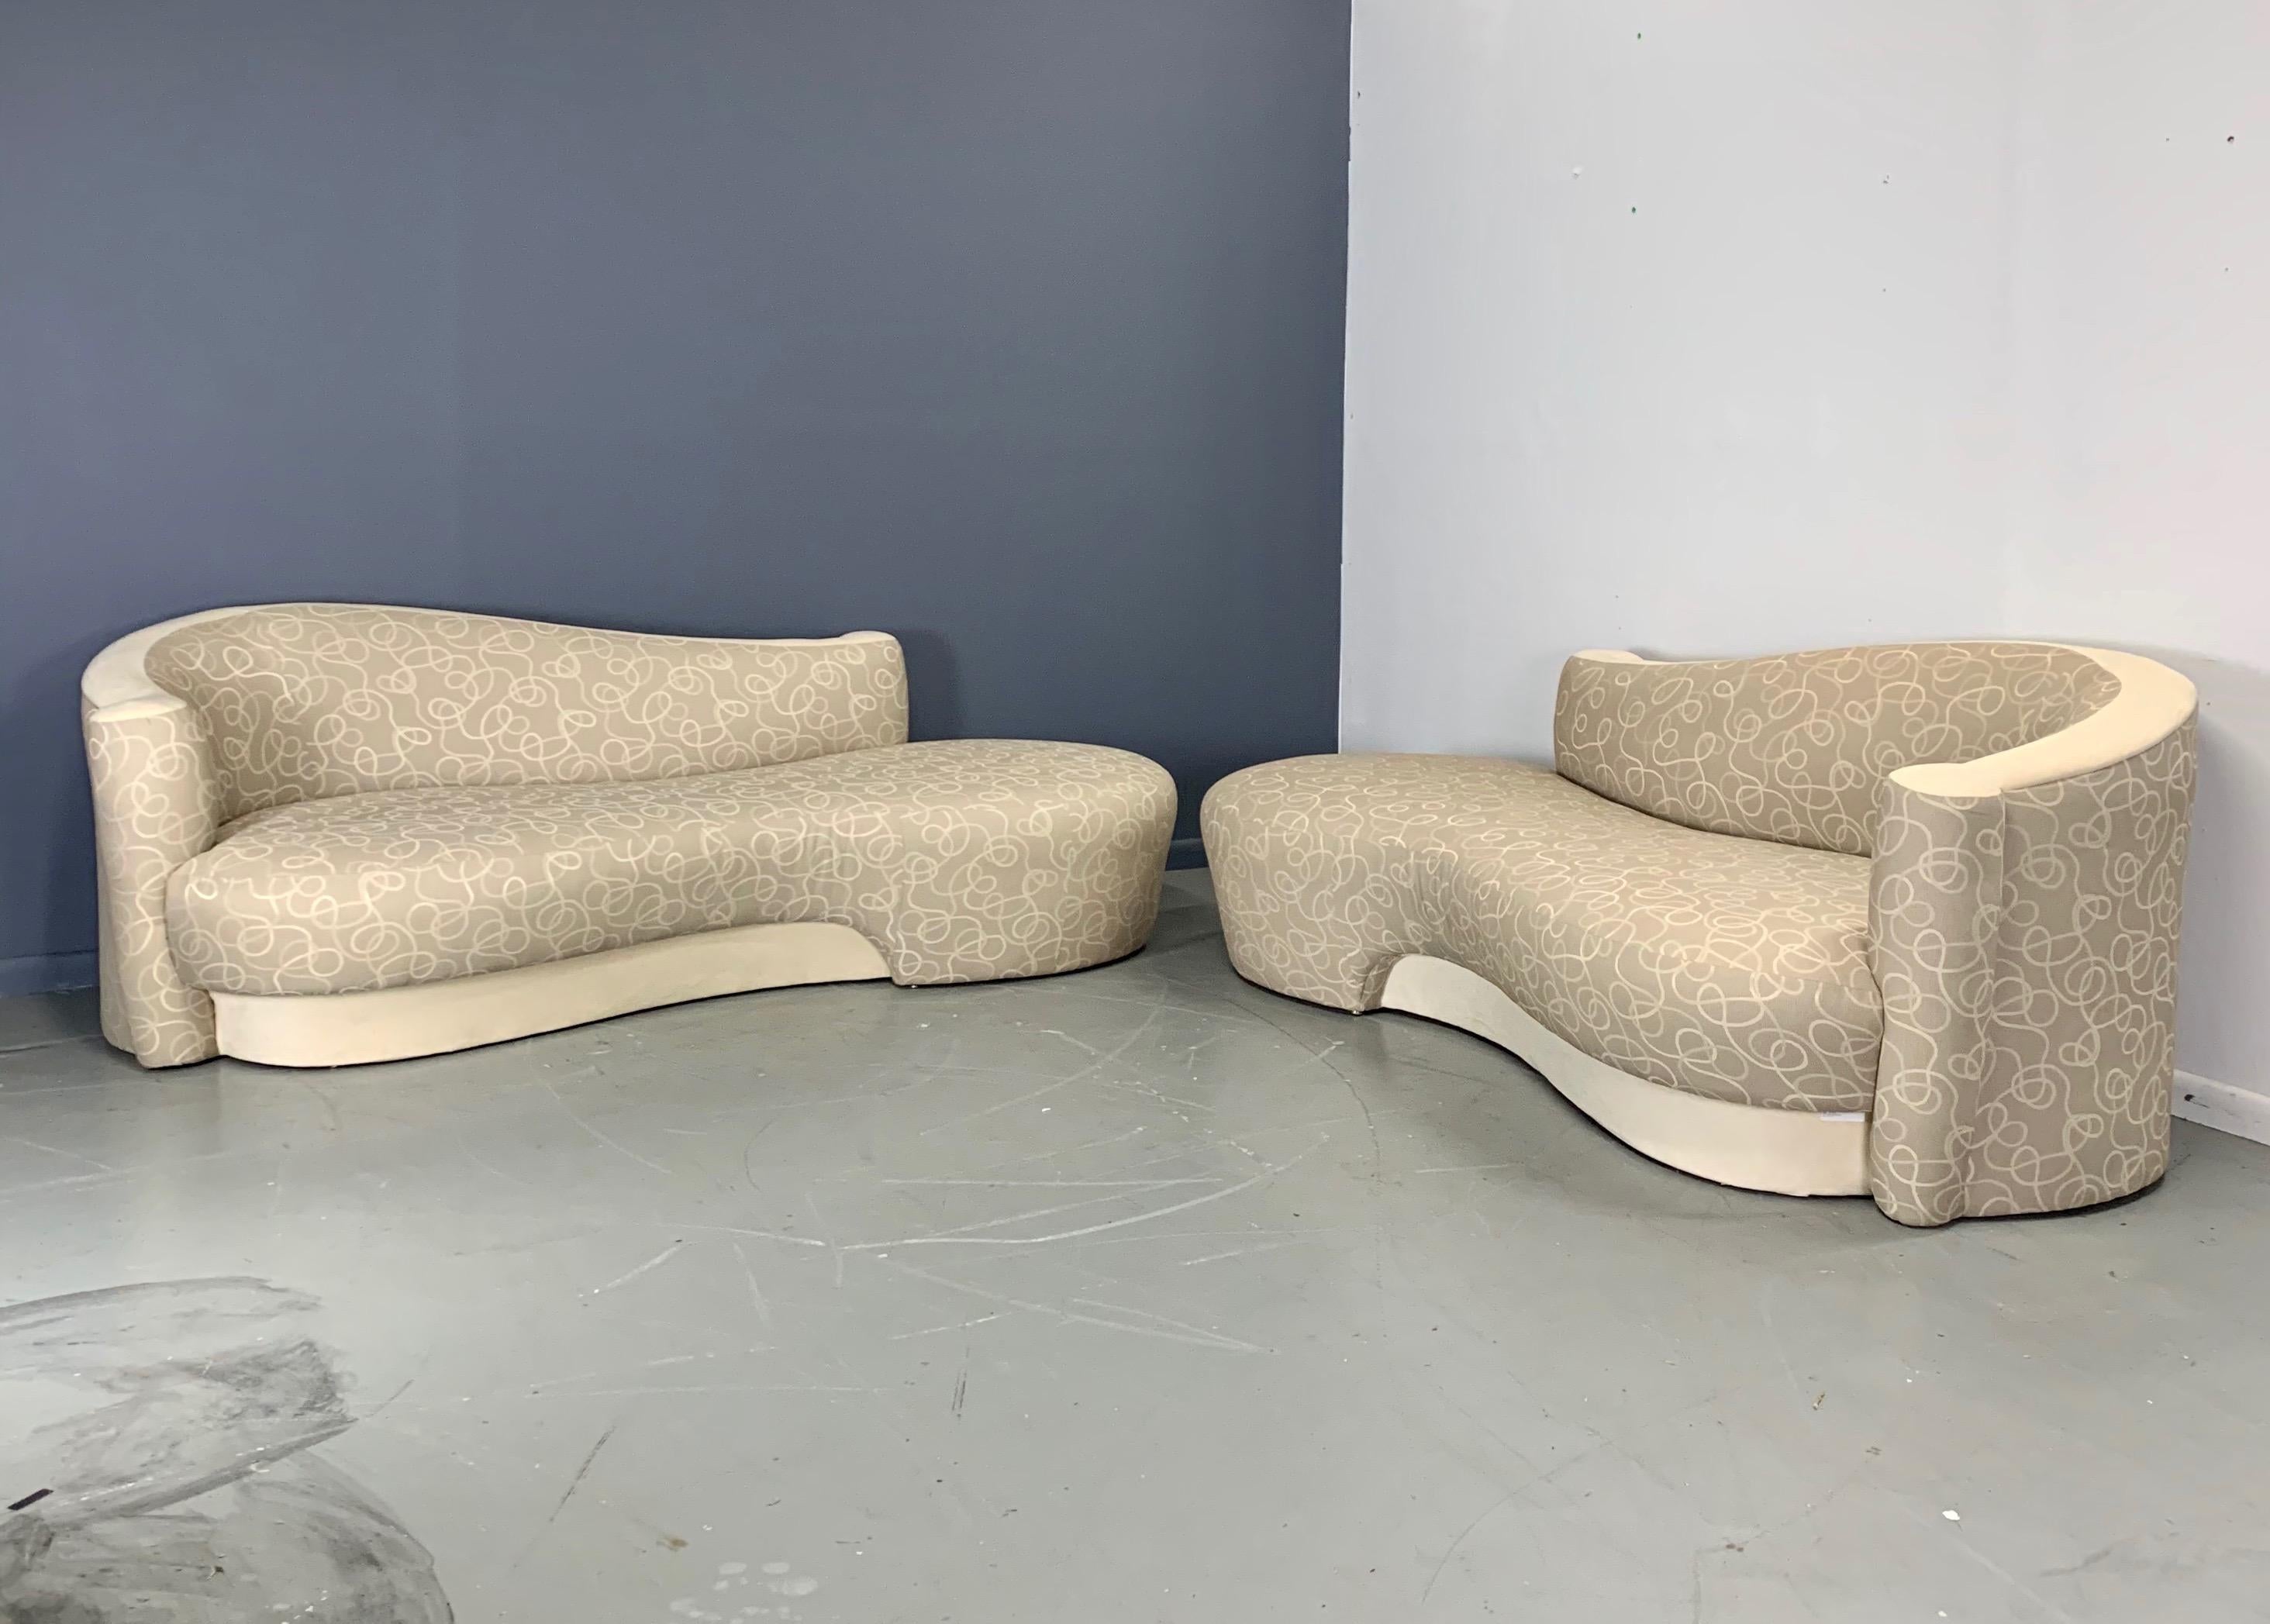 Sculptural, curvy, glamorous, this chaise/sofa looks great from all angles. Quite comfortable and reminiscent of designs by well-known designers for Weiman.